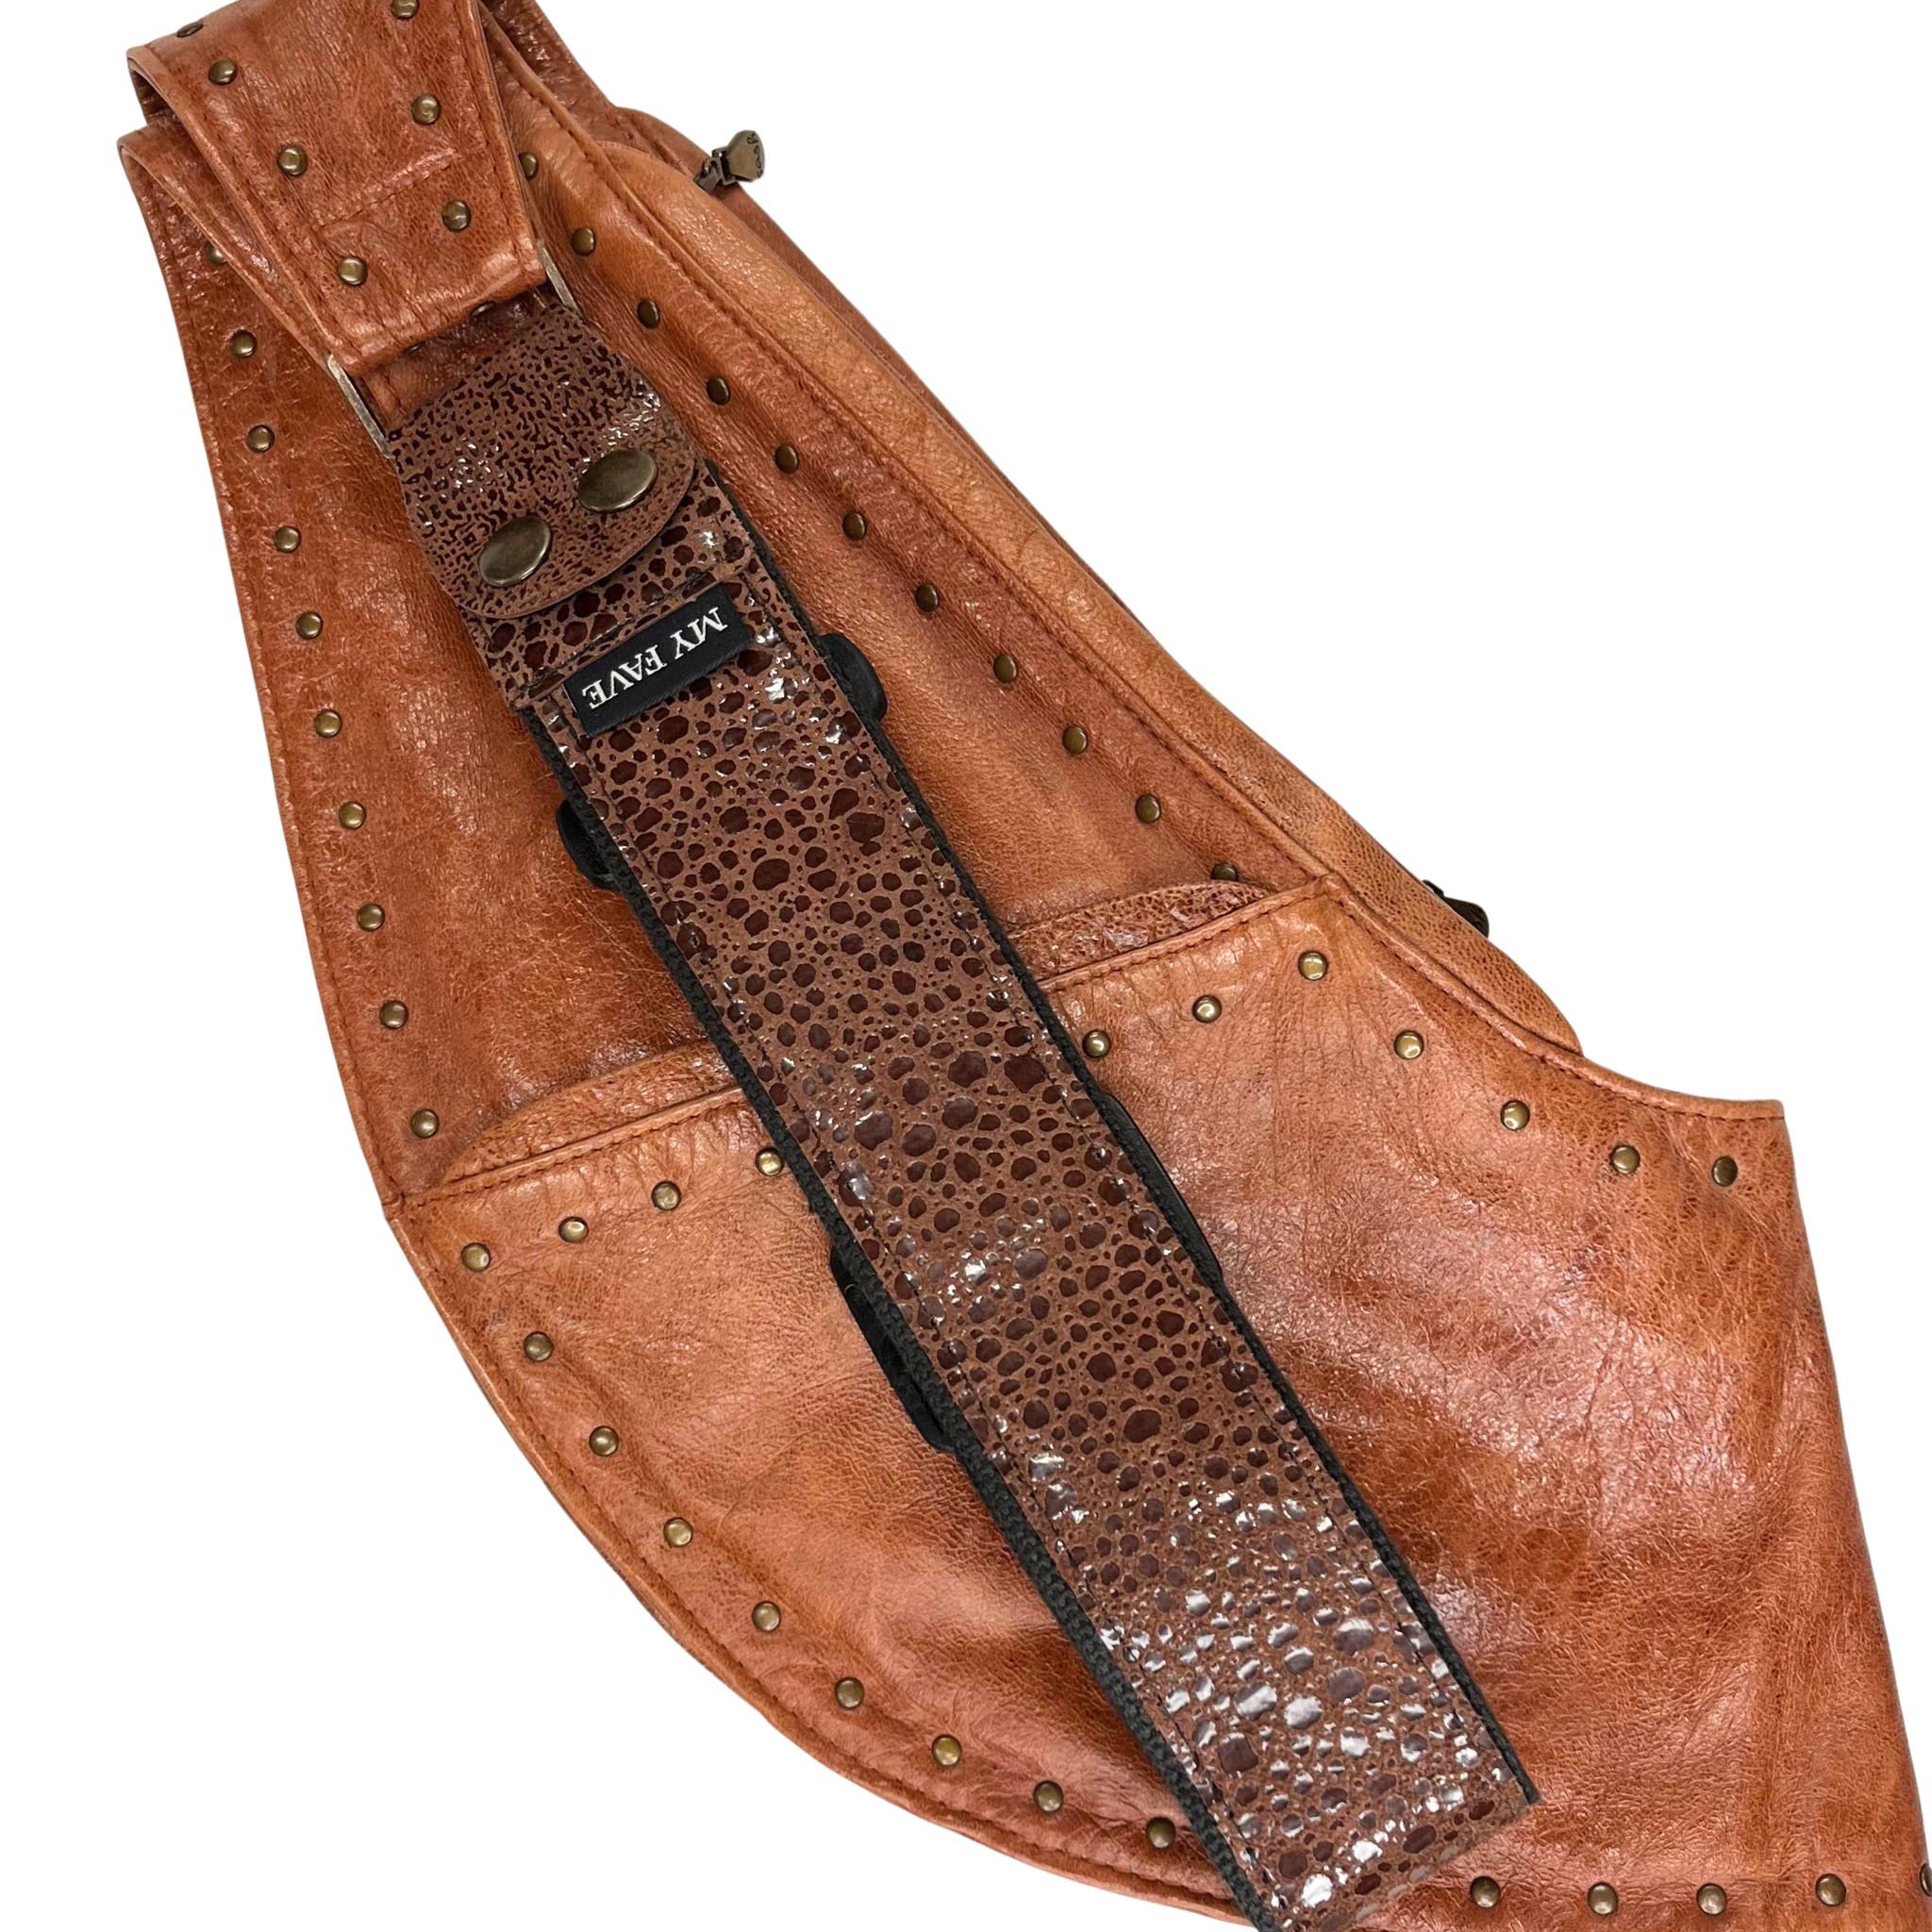 Leathers - Brown Medley